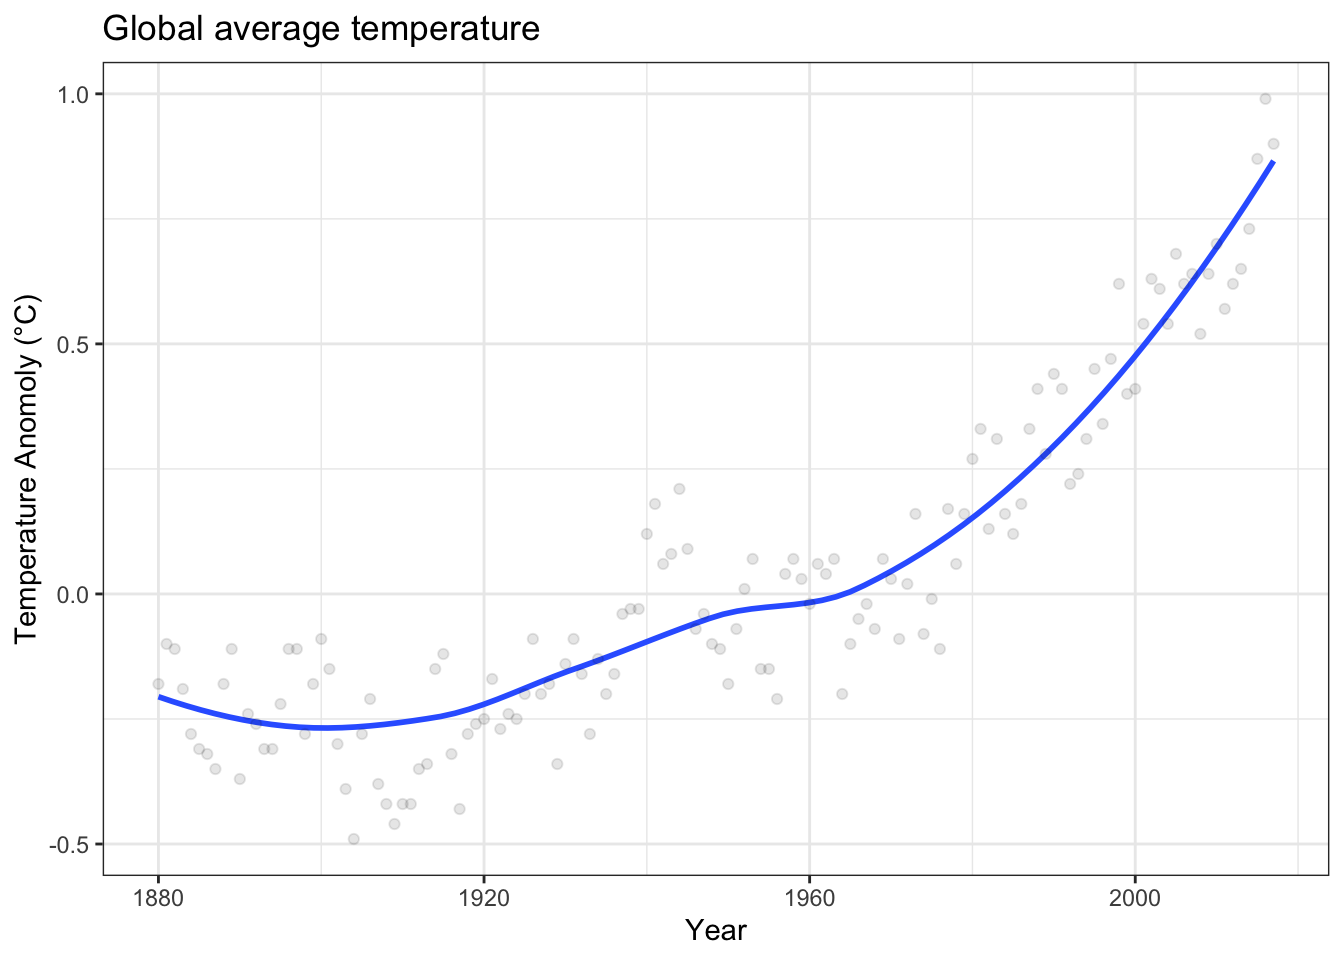 Global average temperature versus year as estimated from year-by-year records. The relationship between temperature and year is continuous, even if the data used to estimate the relationship is not.